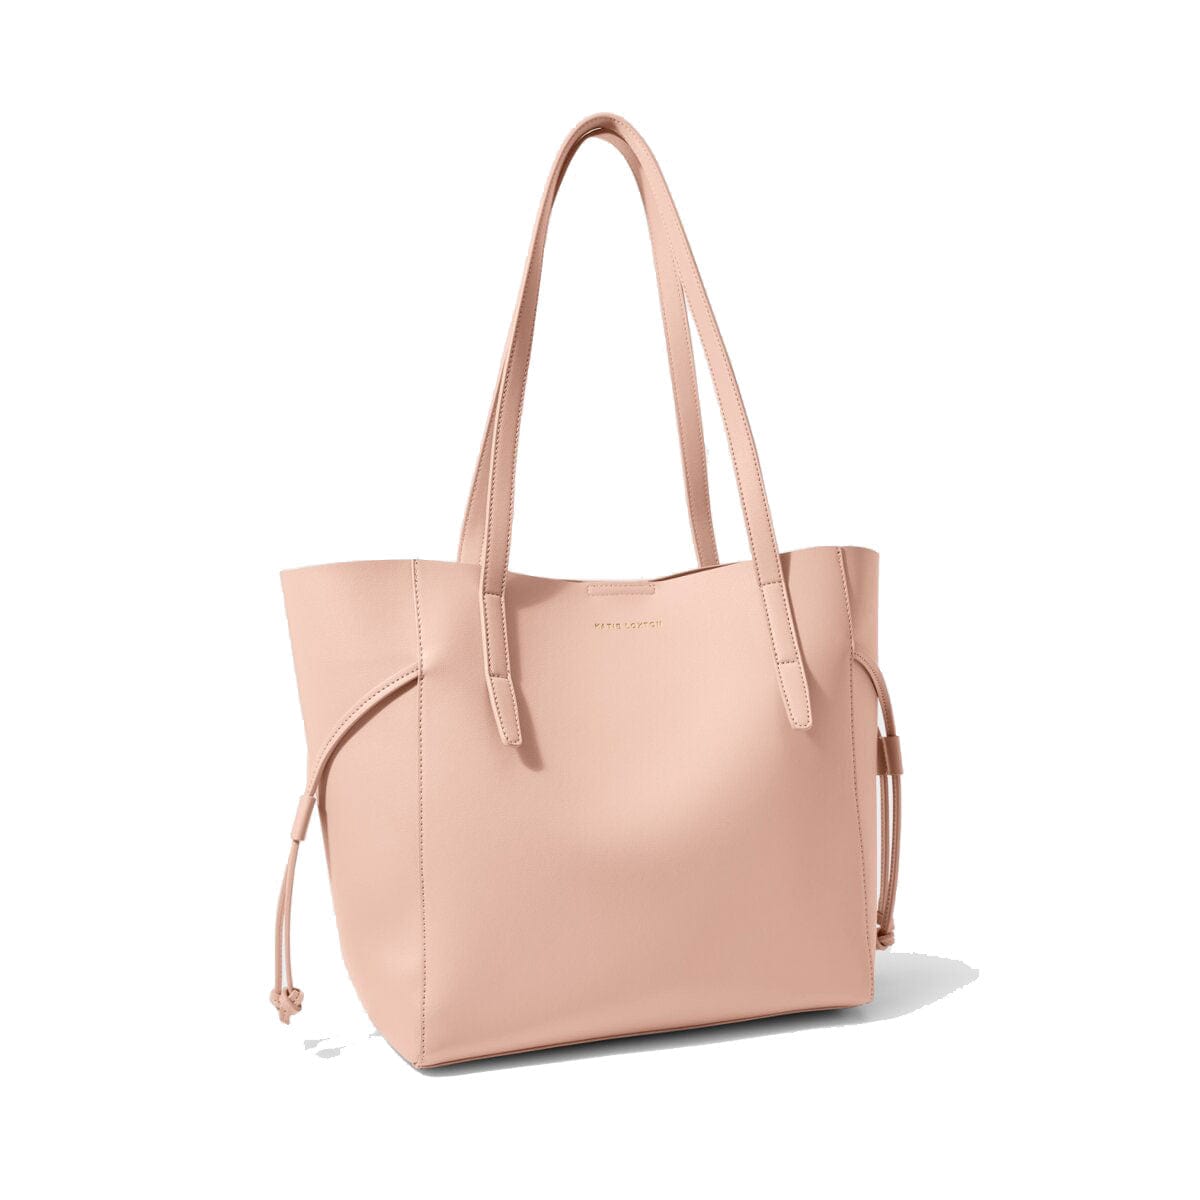 Katie Loxton Tote Bag Dusty Pink Katie Loxton Ashley Tote Bag - Mink / Off White